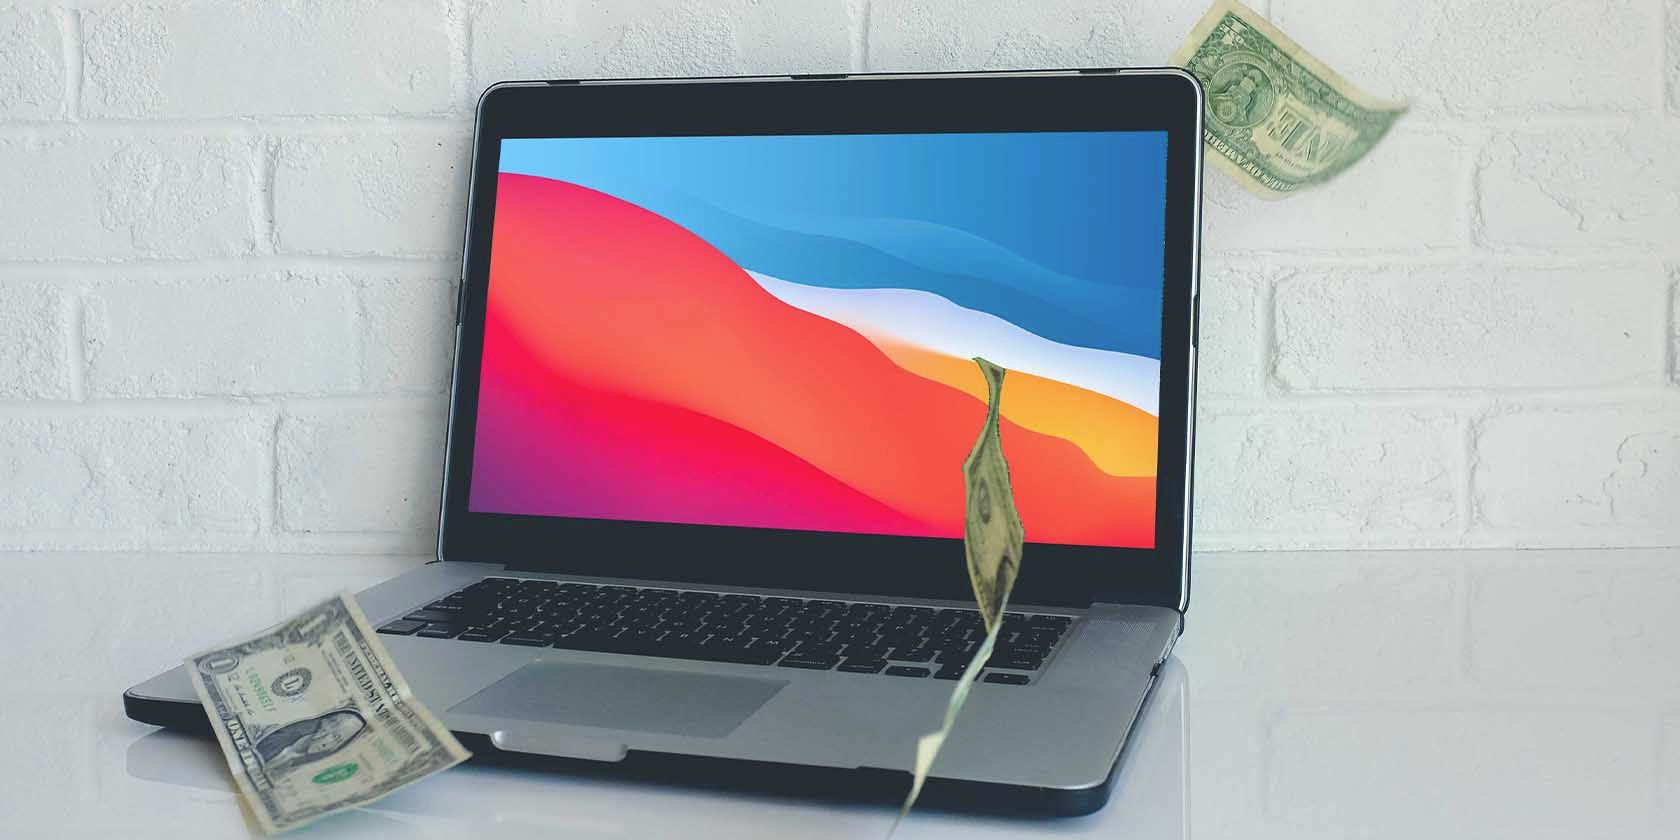 MacBook with Money falling on it